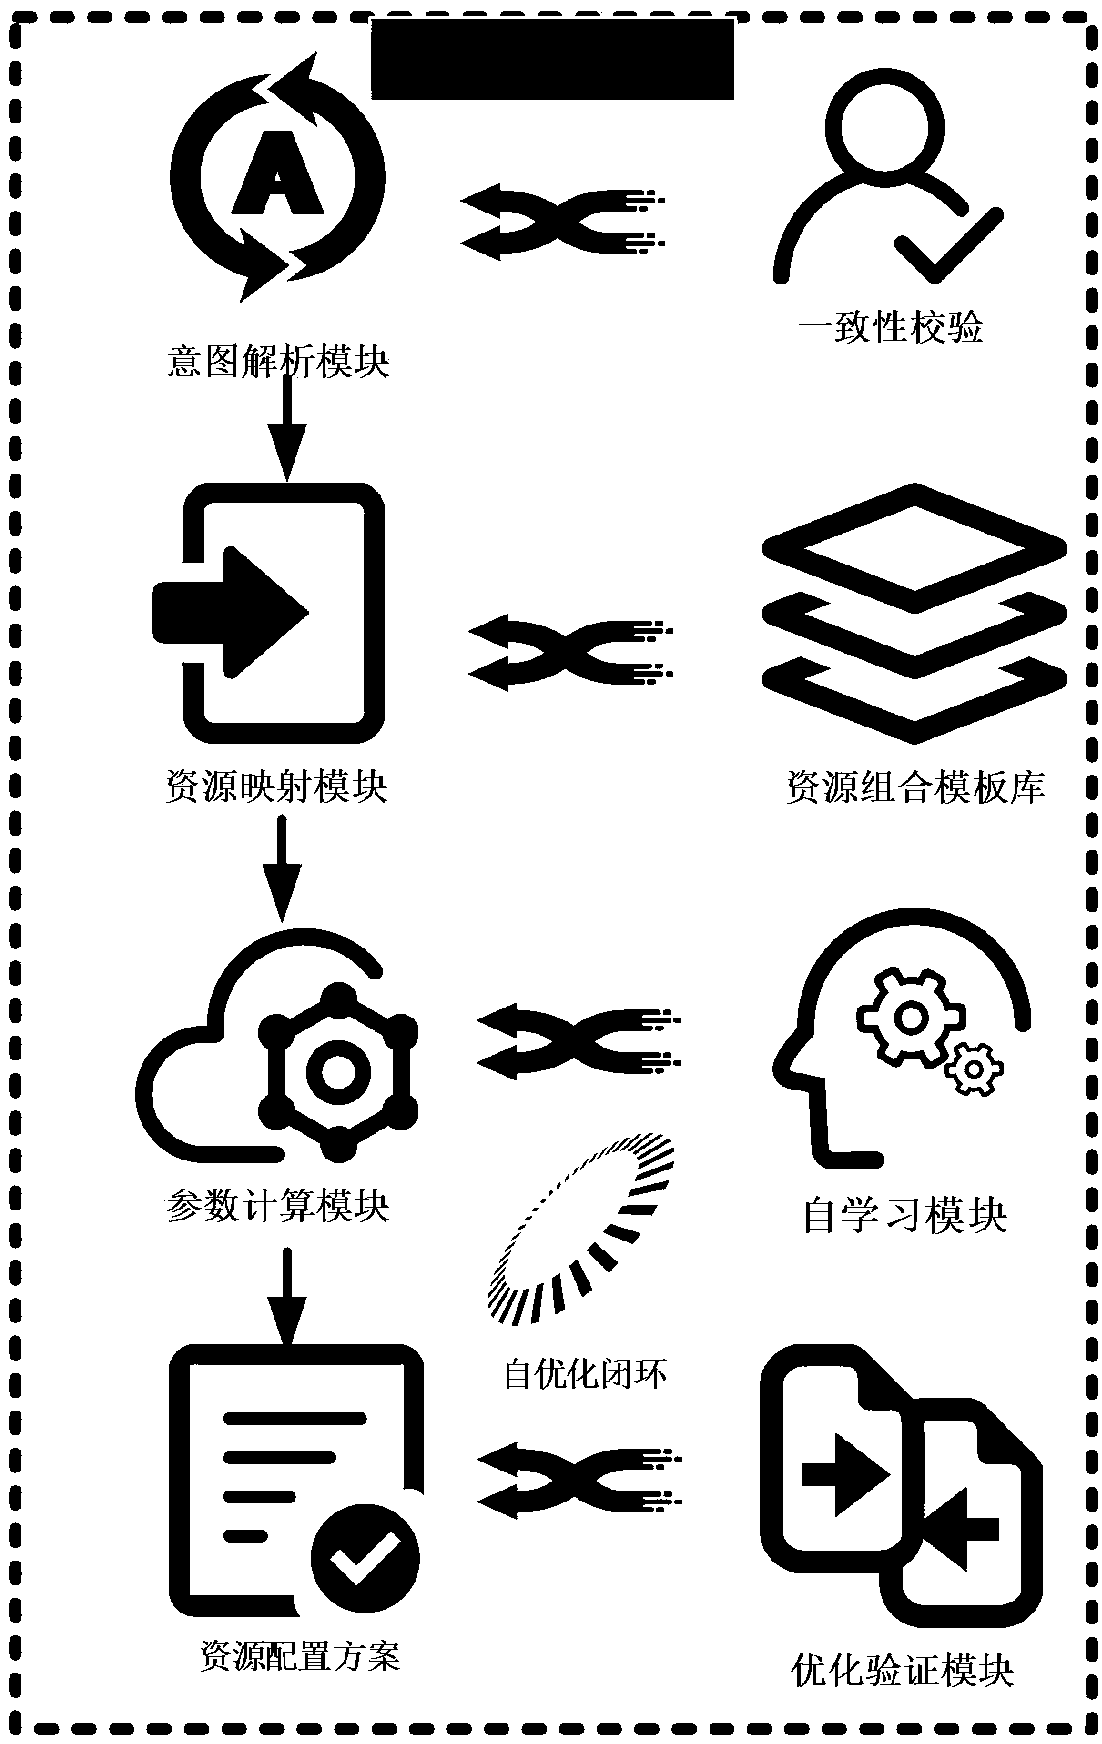 Intention-driven cloud access network system and method